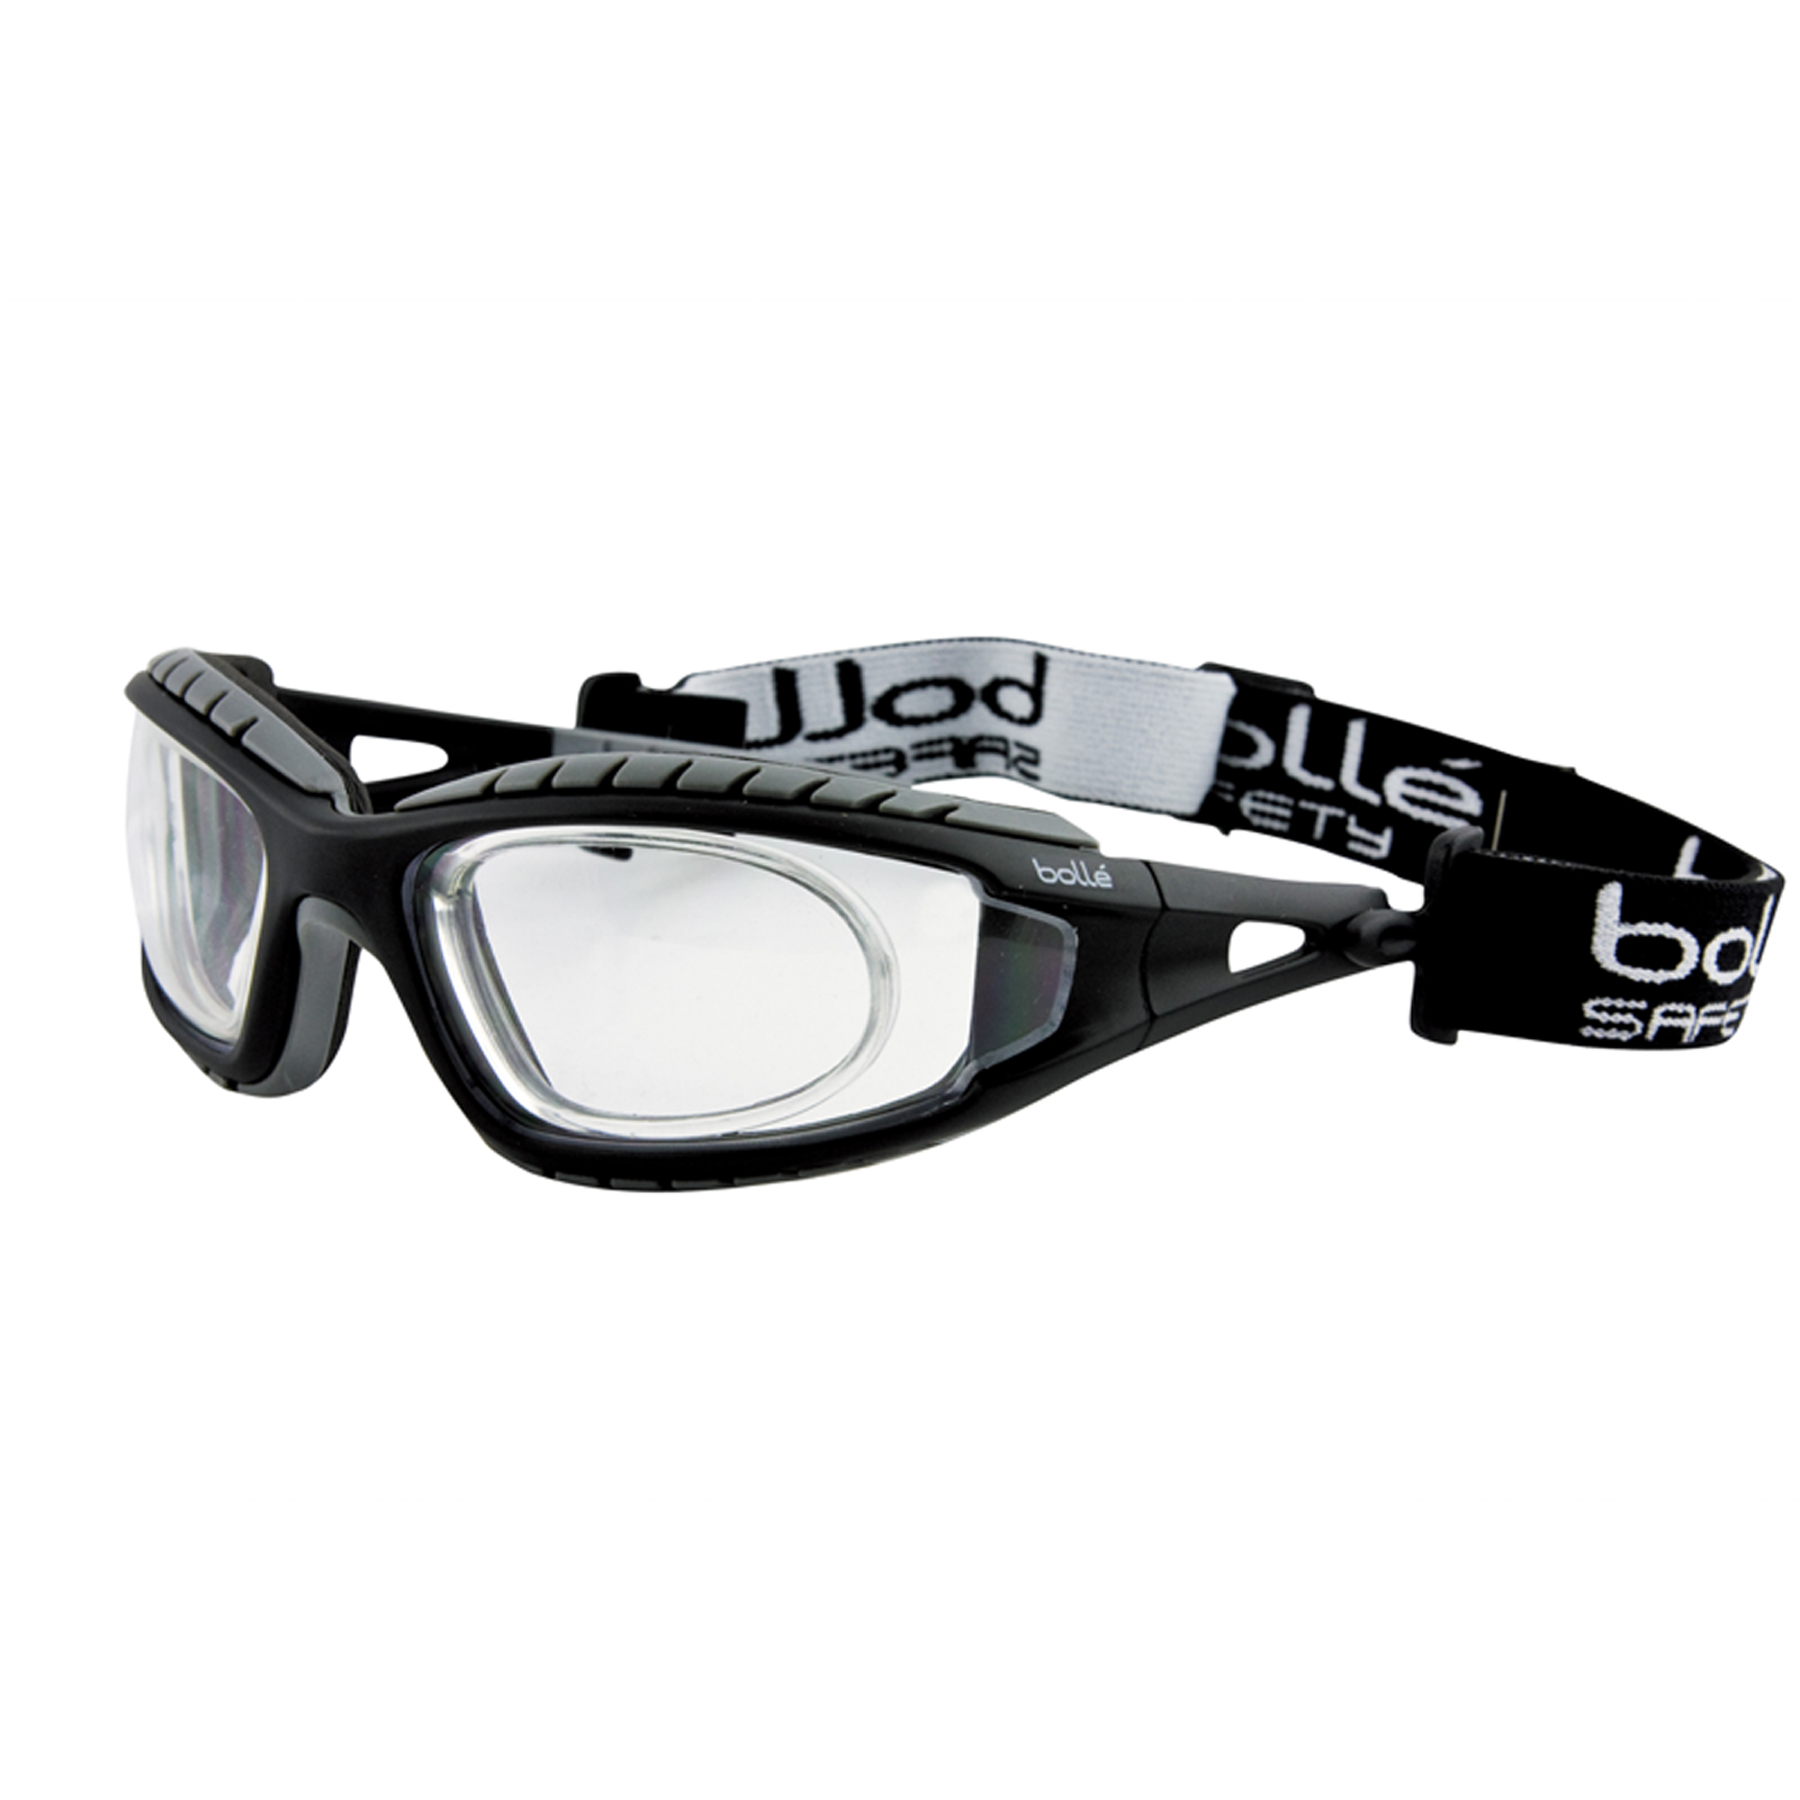 BOLLE TRACKER CLEAR LENS SPEC C/W PLATINUM COATING - First Safety